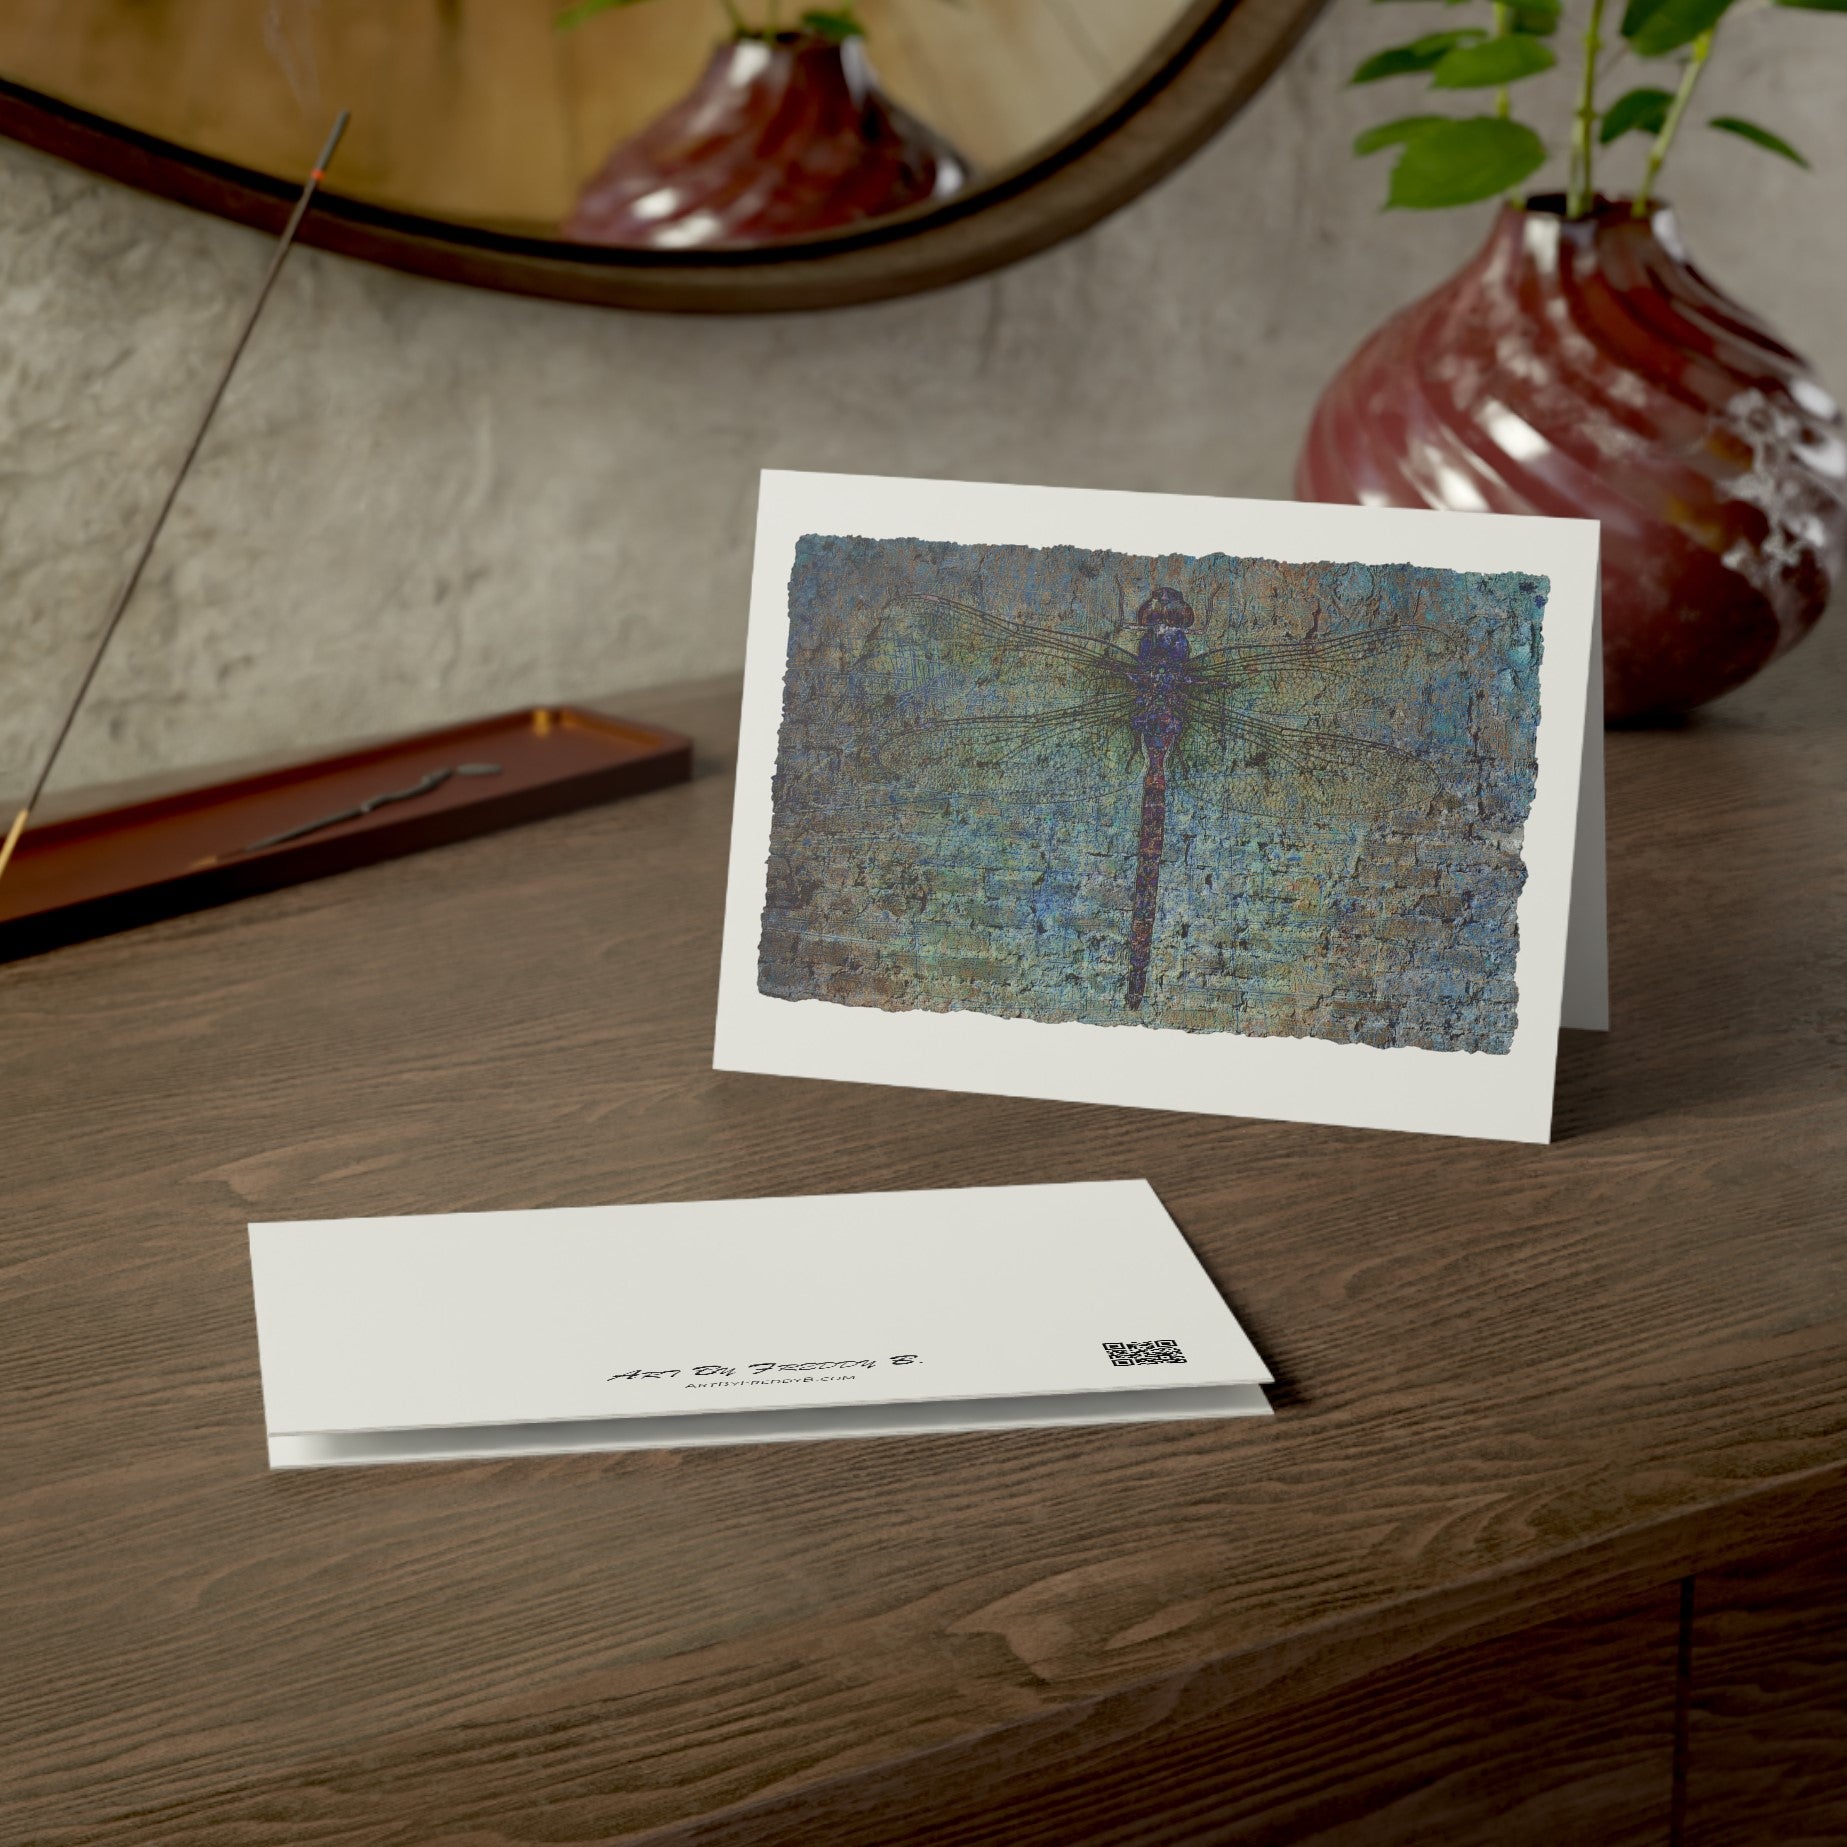 Dragonfly Print Greeting Cards Blue Dragonfly on Brick Stationery and Blank Cards on table